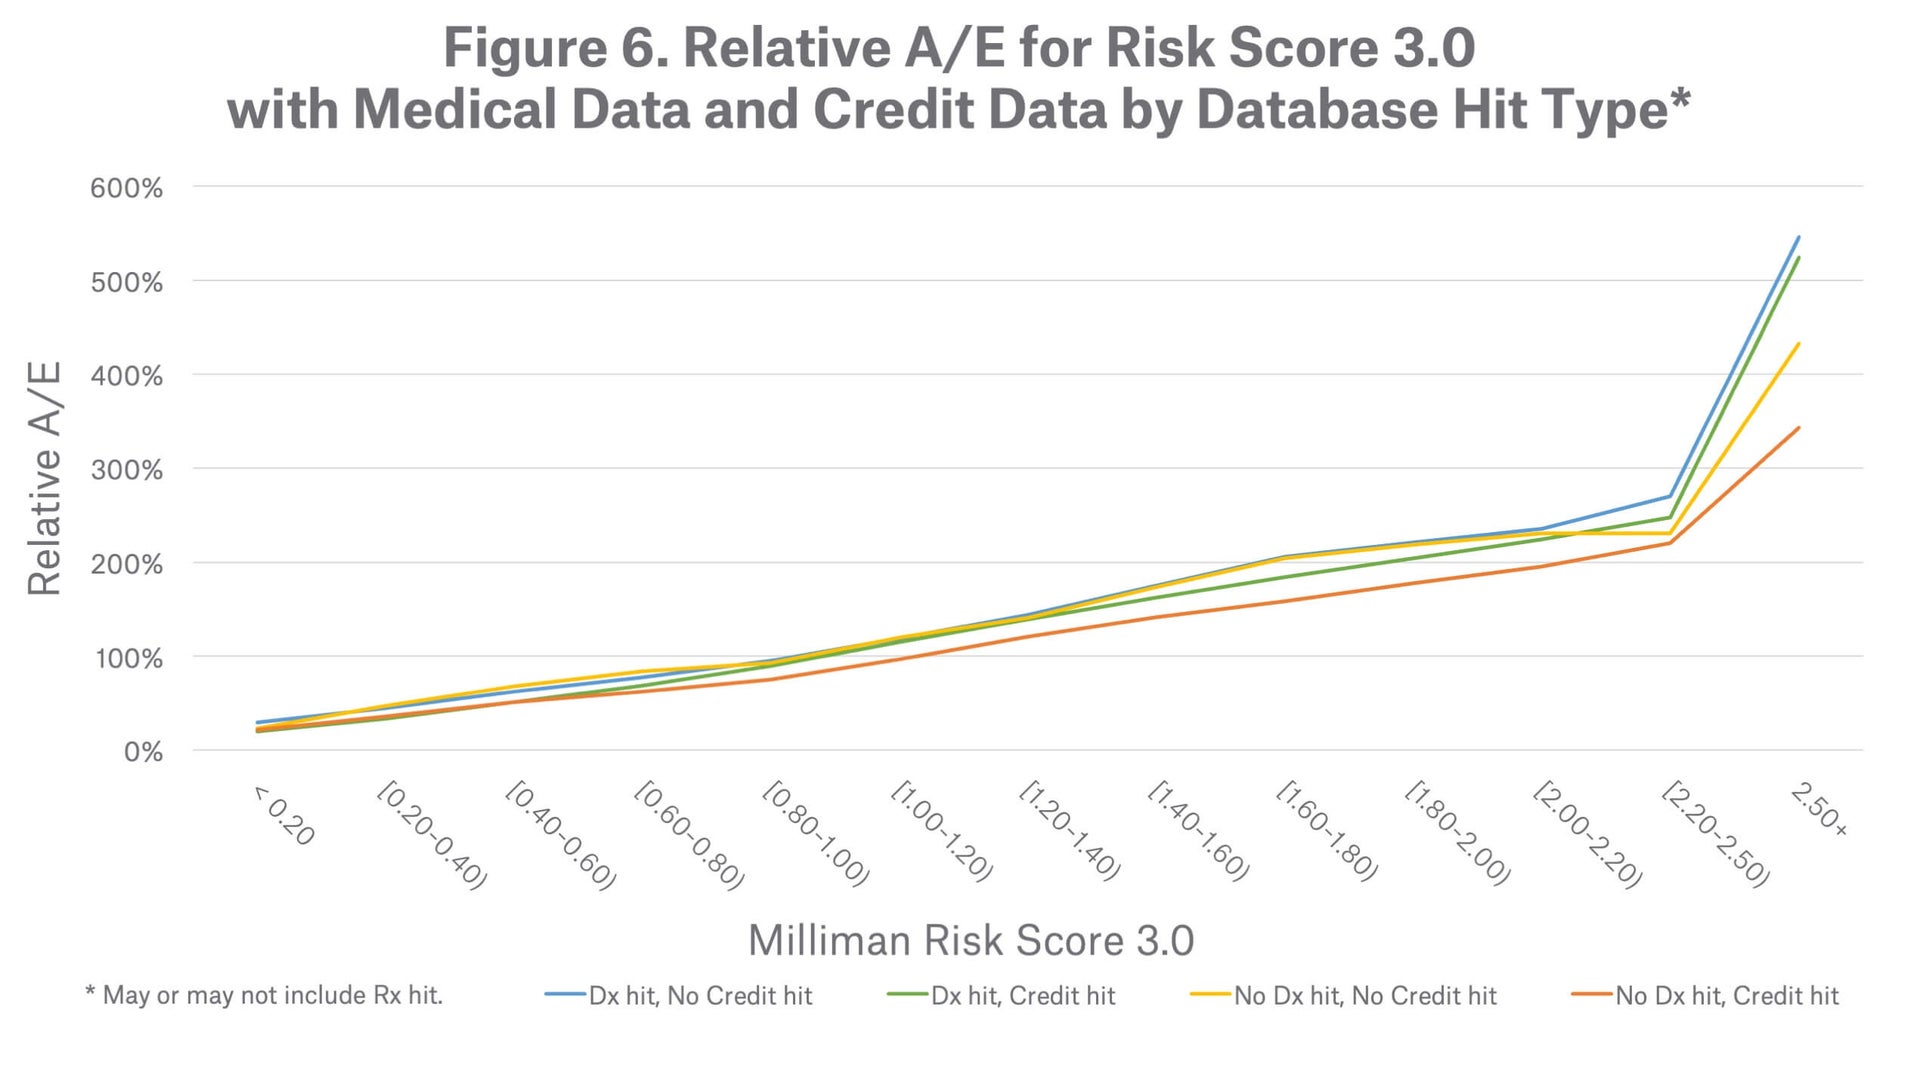 Figure-6.-Relative-A-E-for-Risk-Score-3.0-with-Medical-and-Credit-Data-by-Database-Hit-Type.jpg